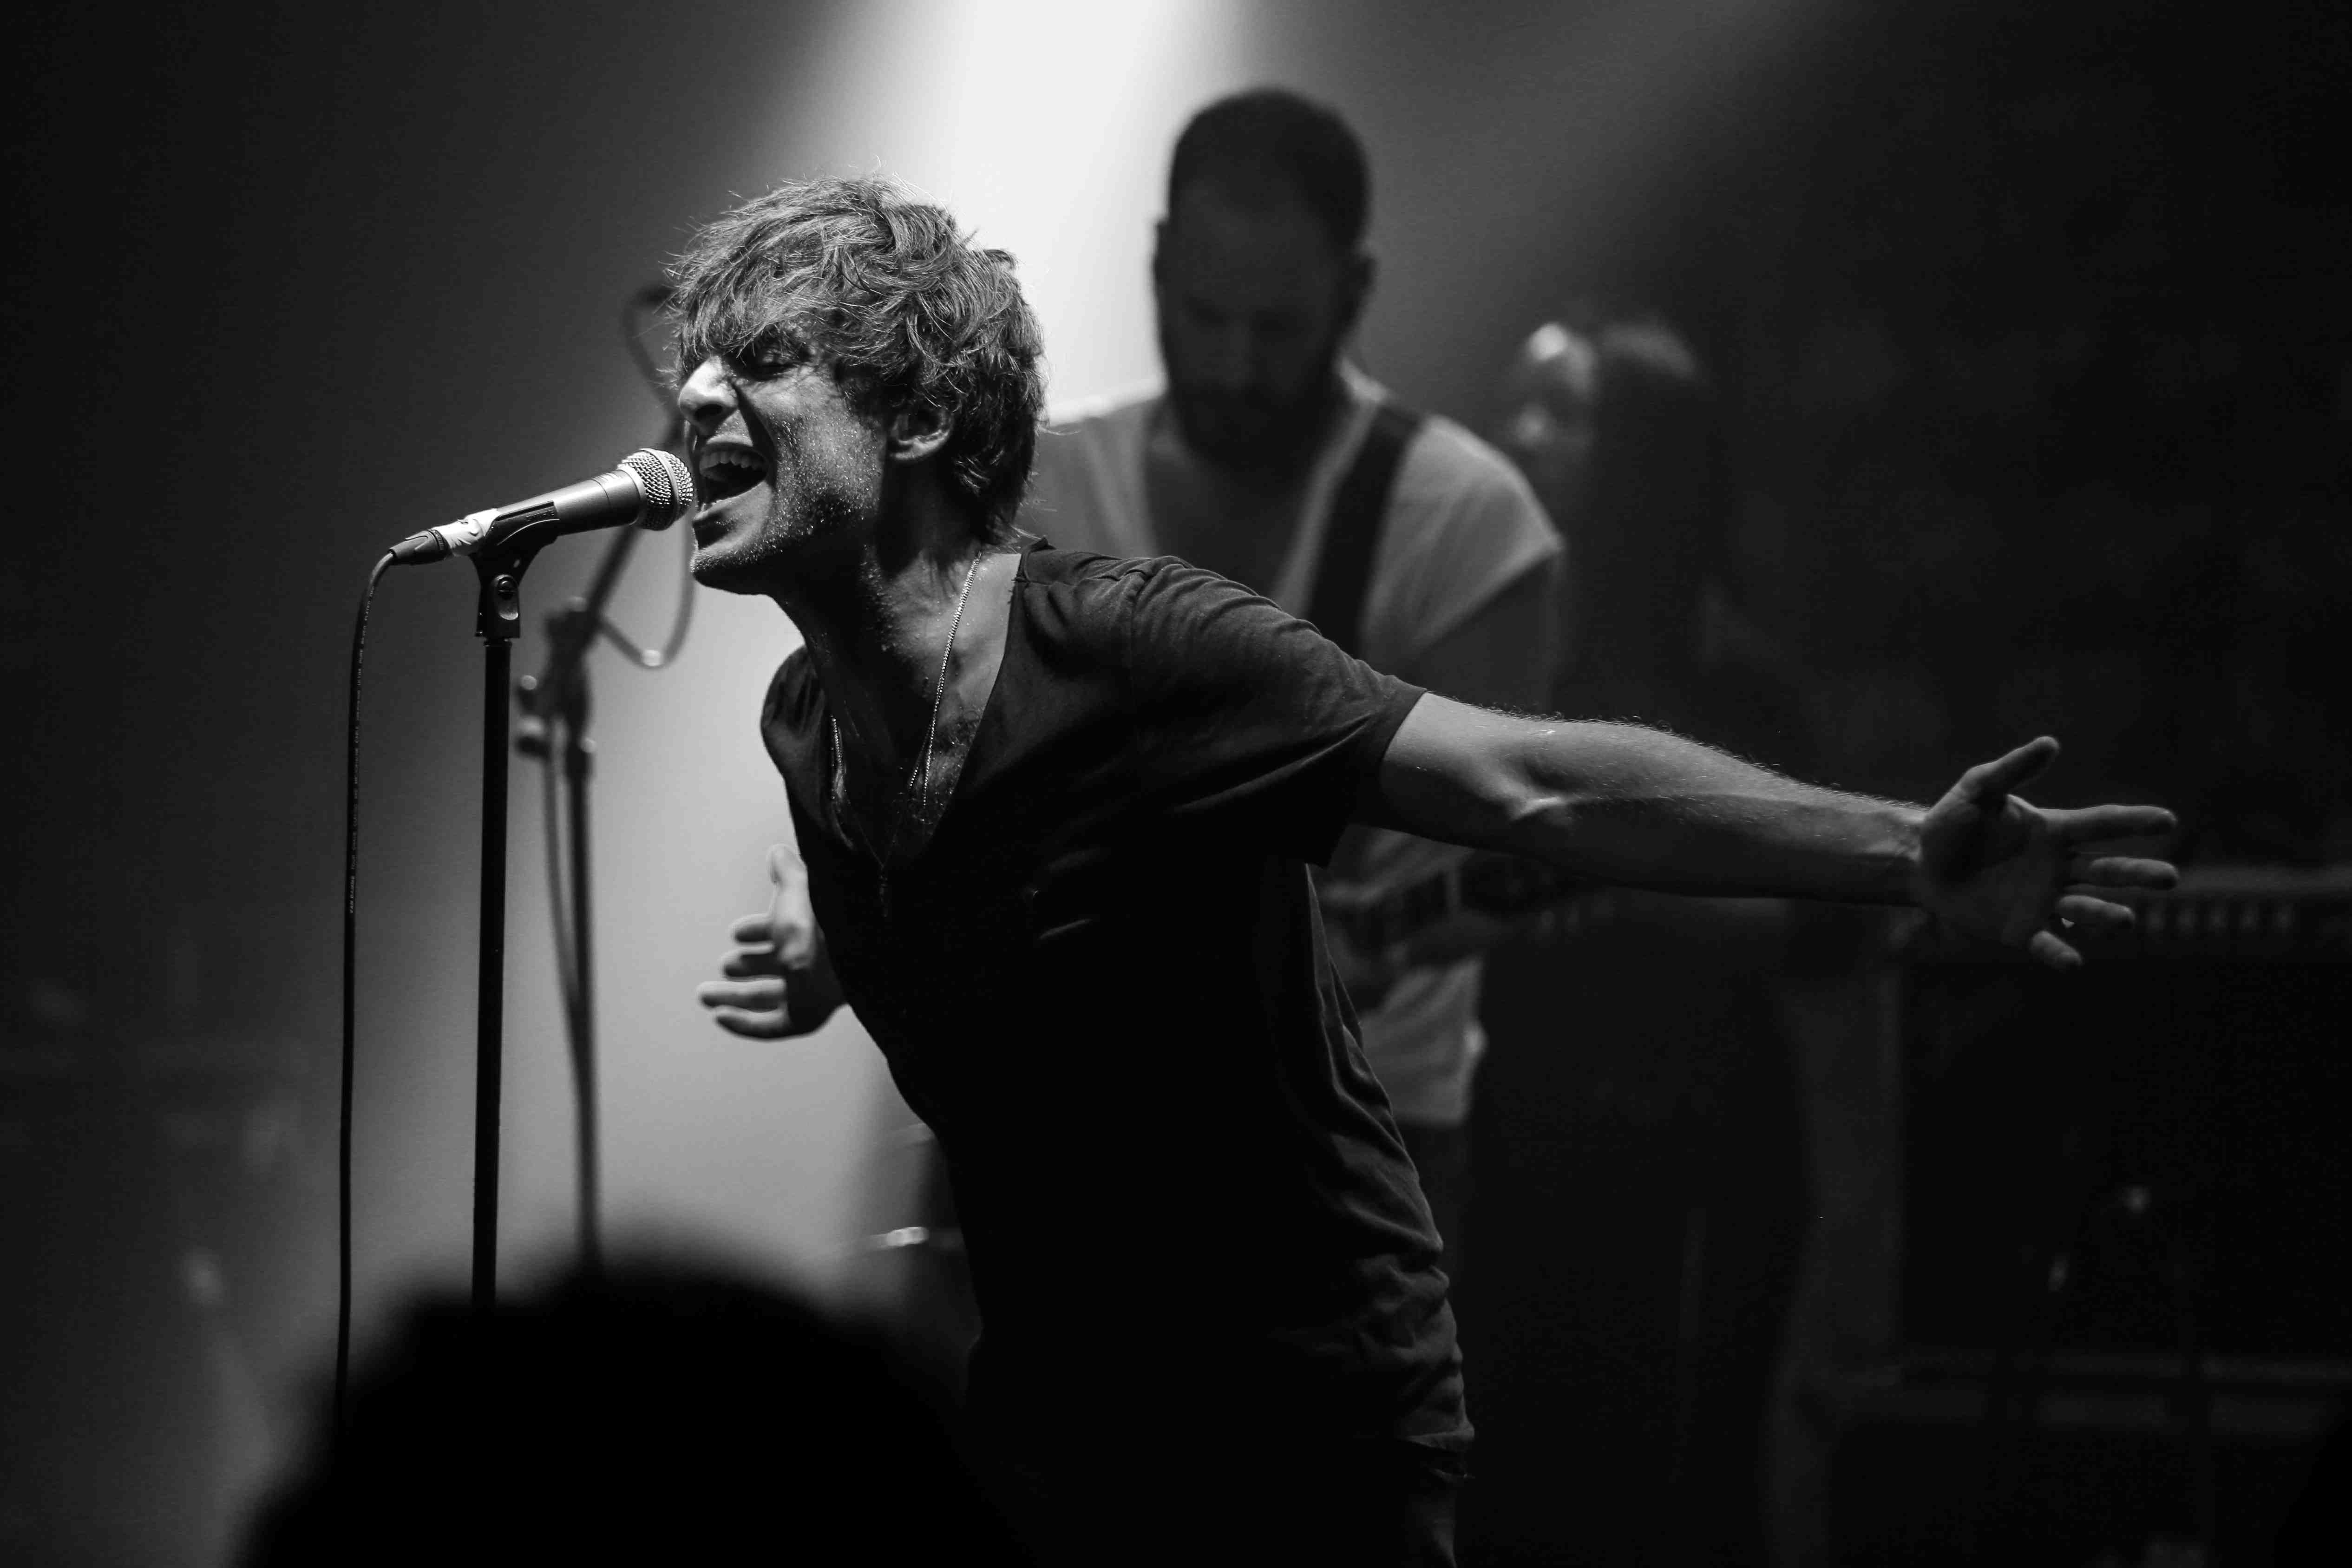 Black and white image of Paolo Nutini singing on stage